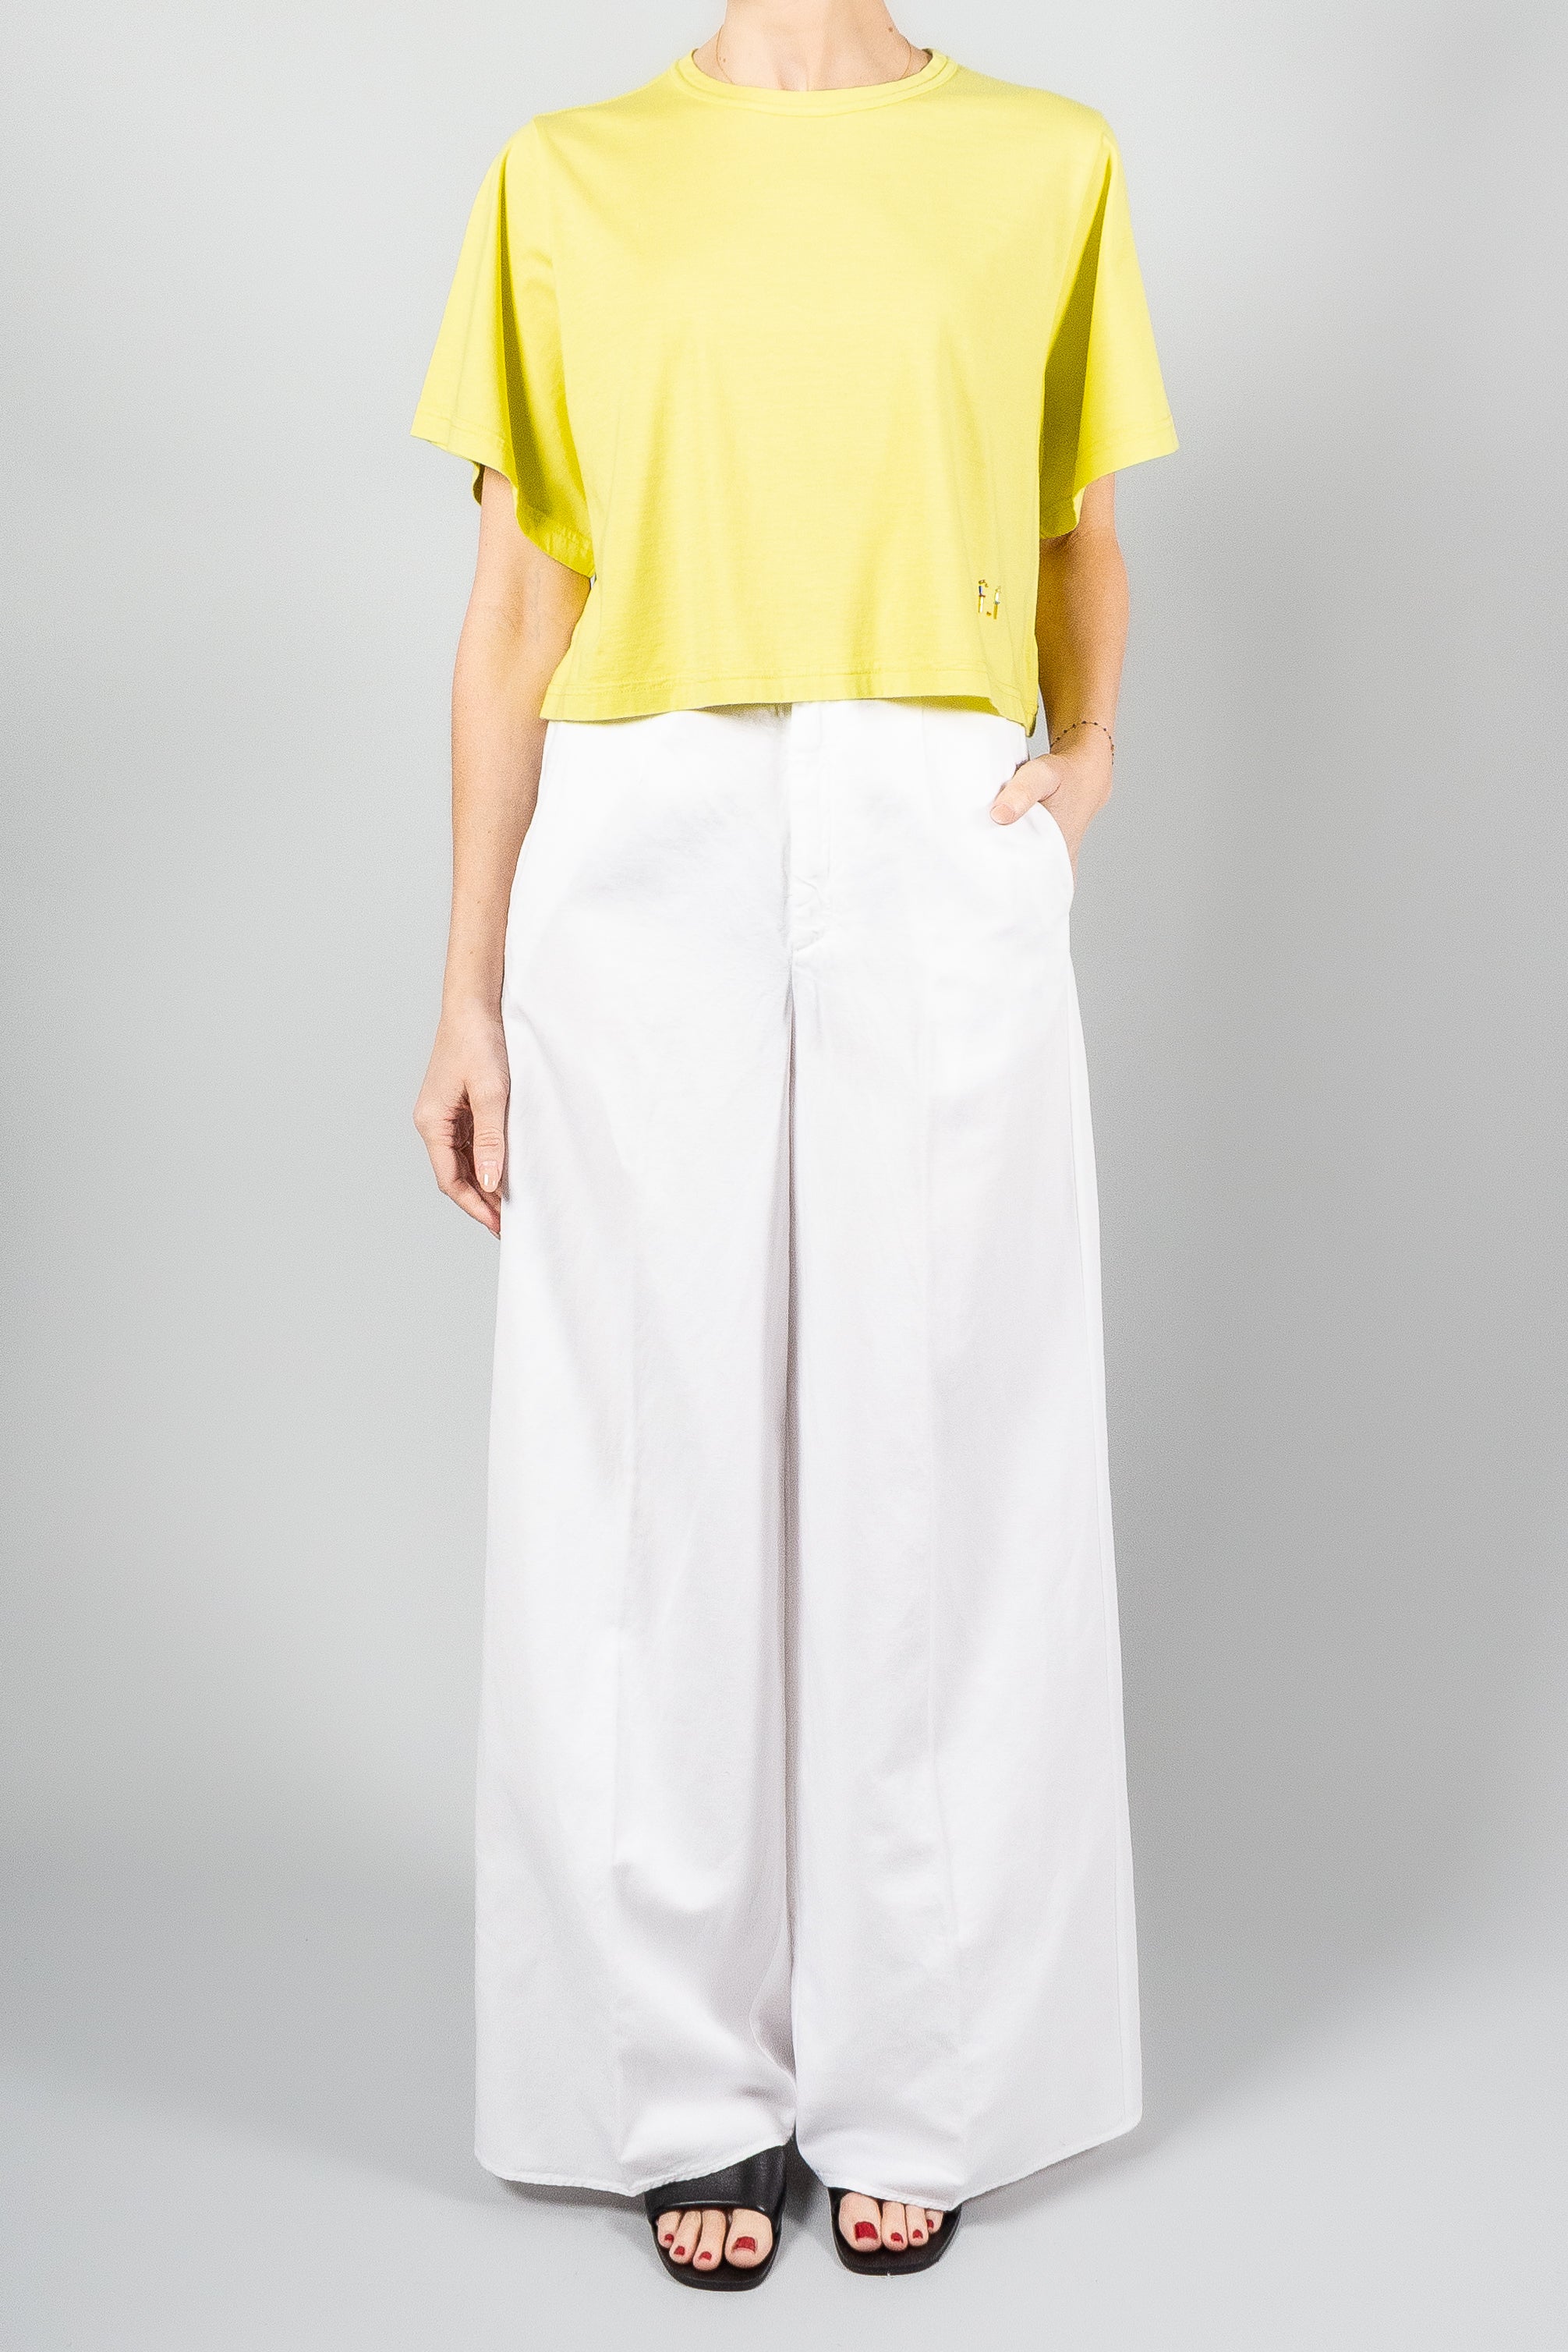 Forte Forte Chic Cotton Gabardine Palazzo Pants-Pants and Shorts-Misch-Boutique-Vancouver-Canada-misch.ca